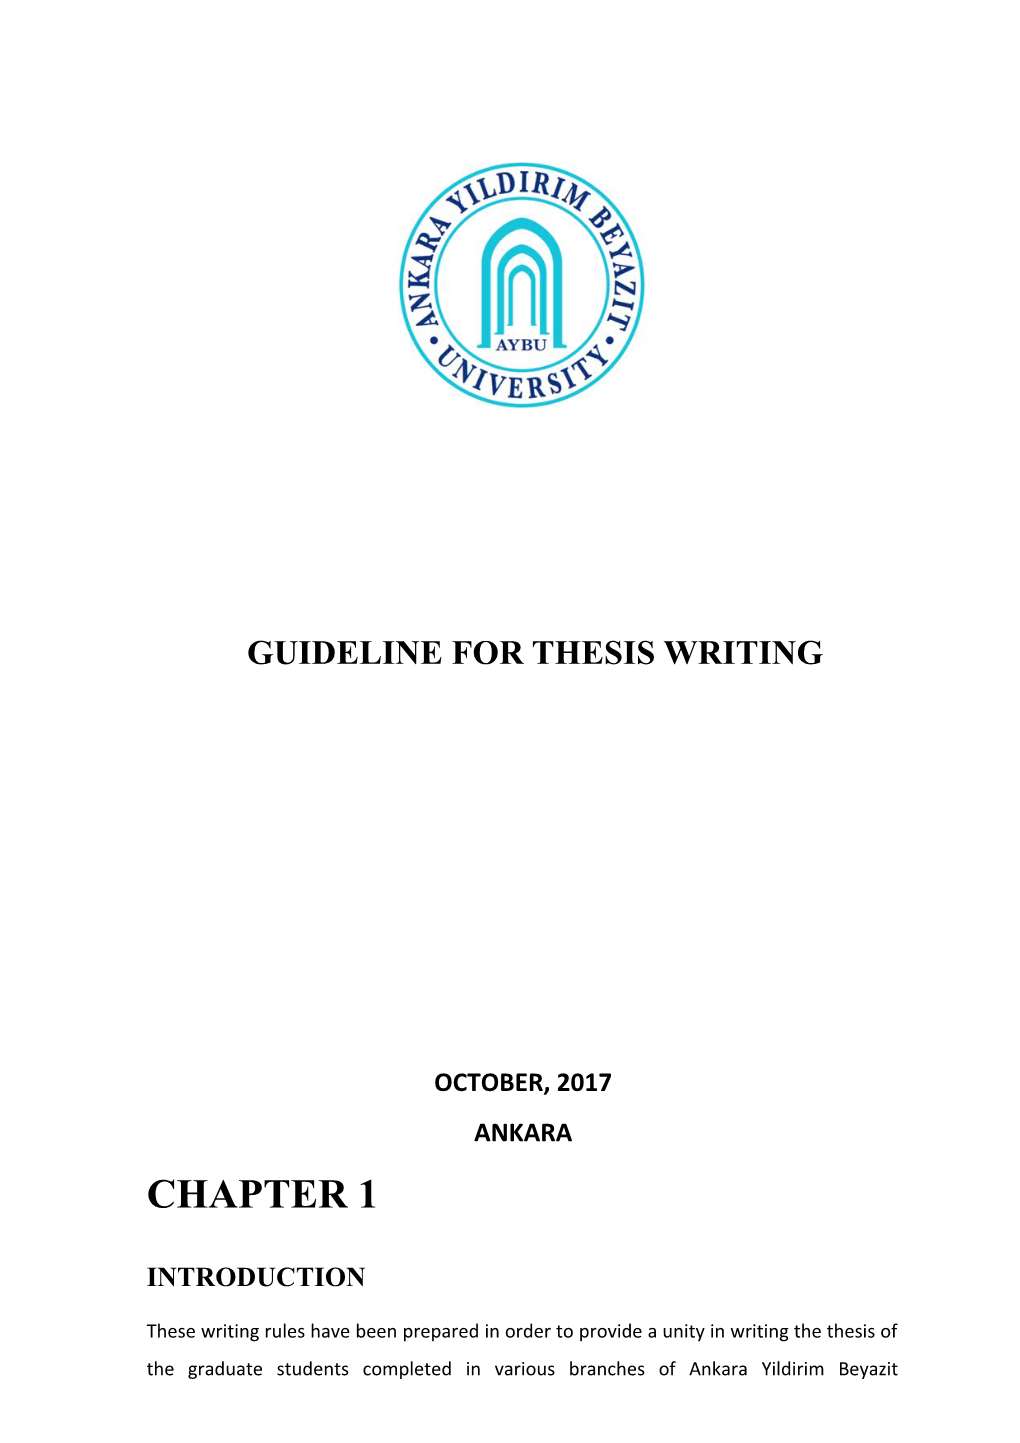 Guideline for Thesis Writing